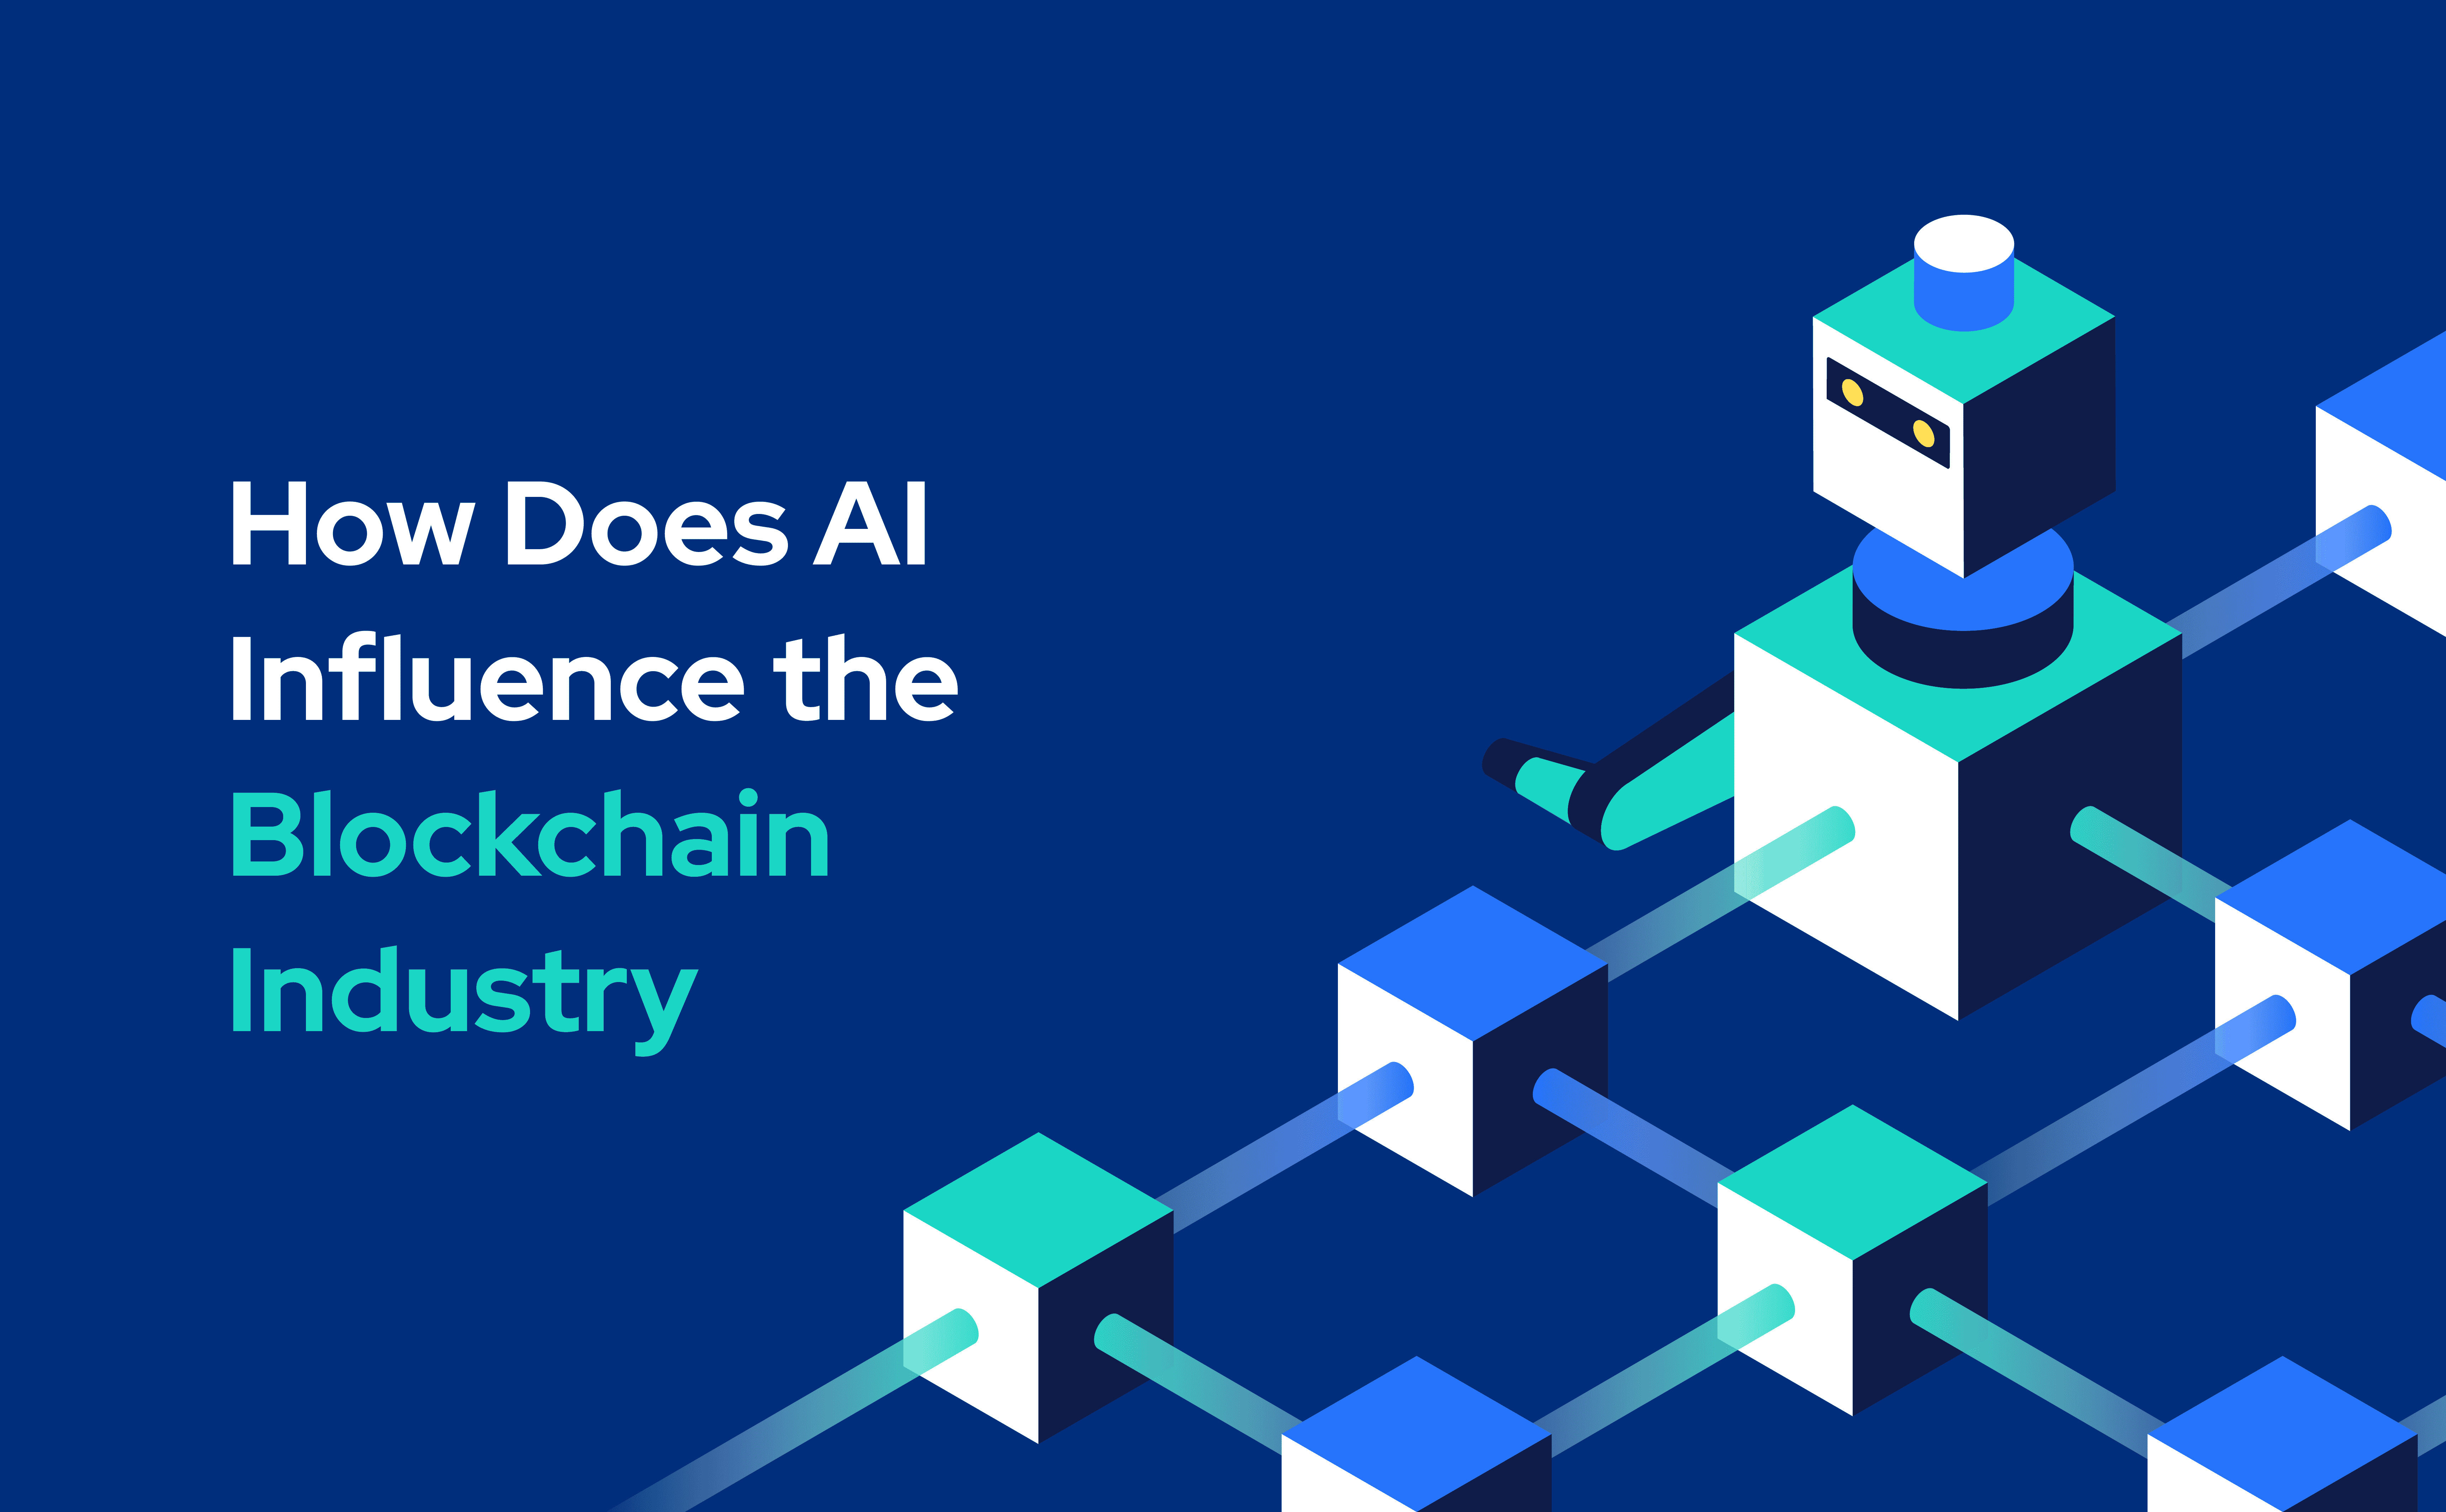 How Does AI Influence Blockchain, Metaverse and NFT Art